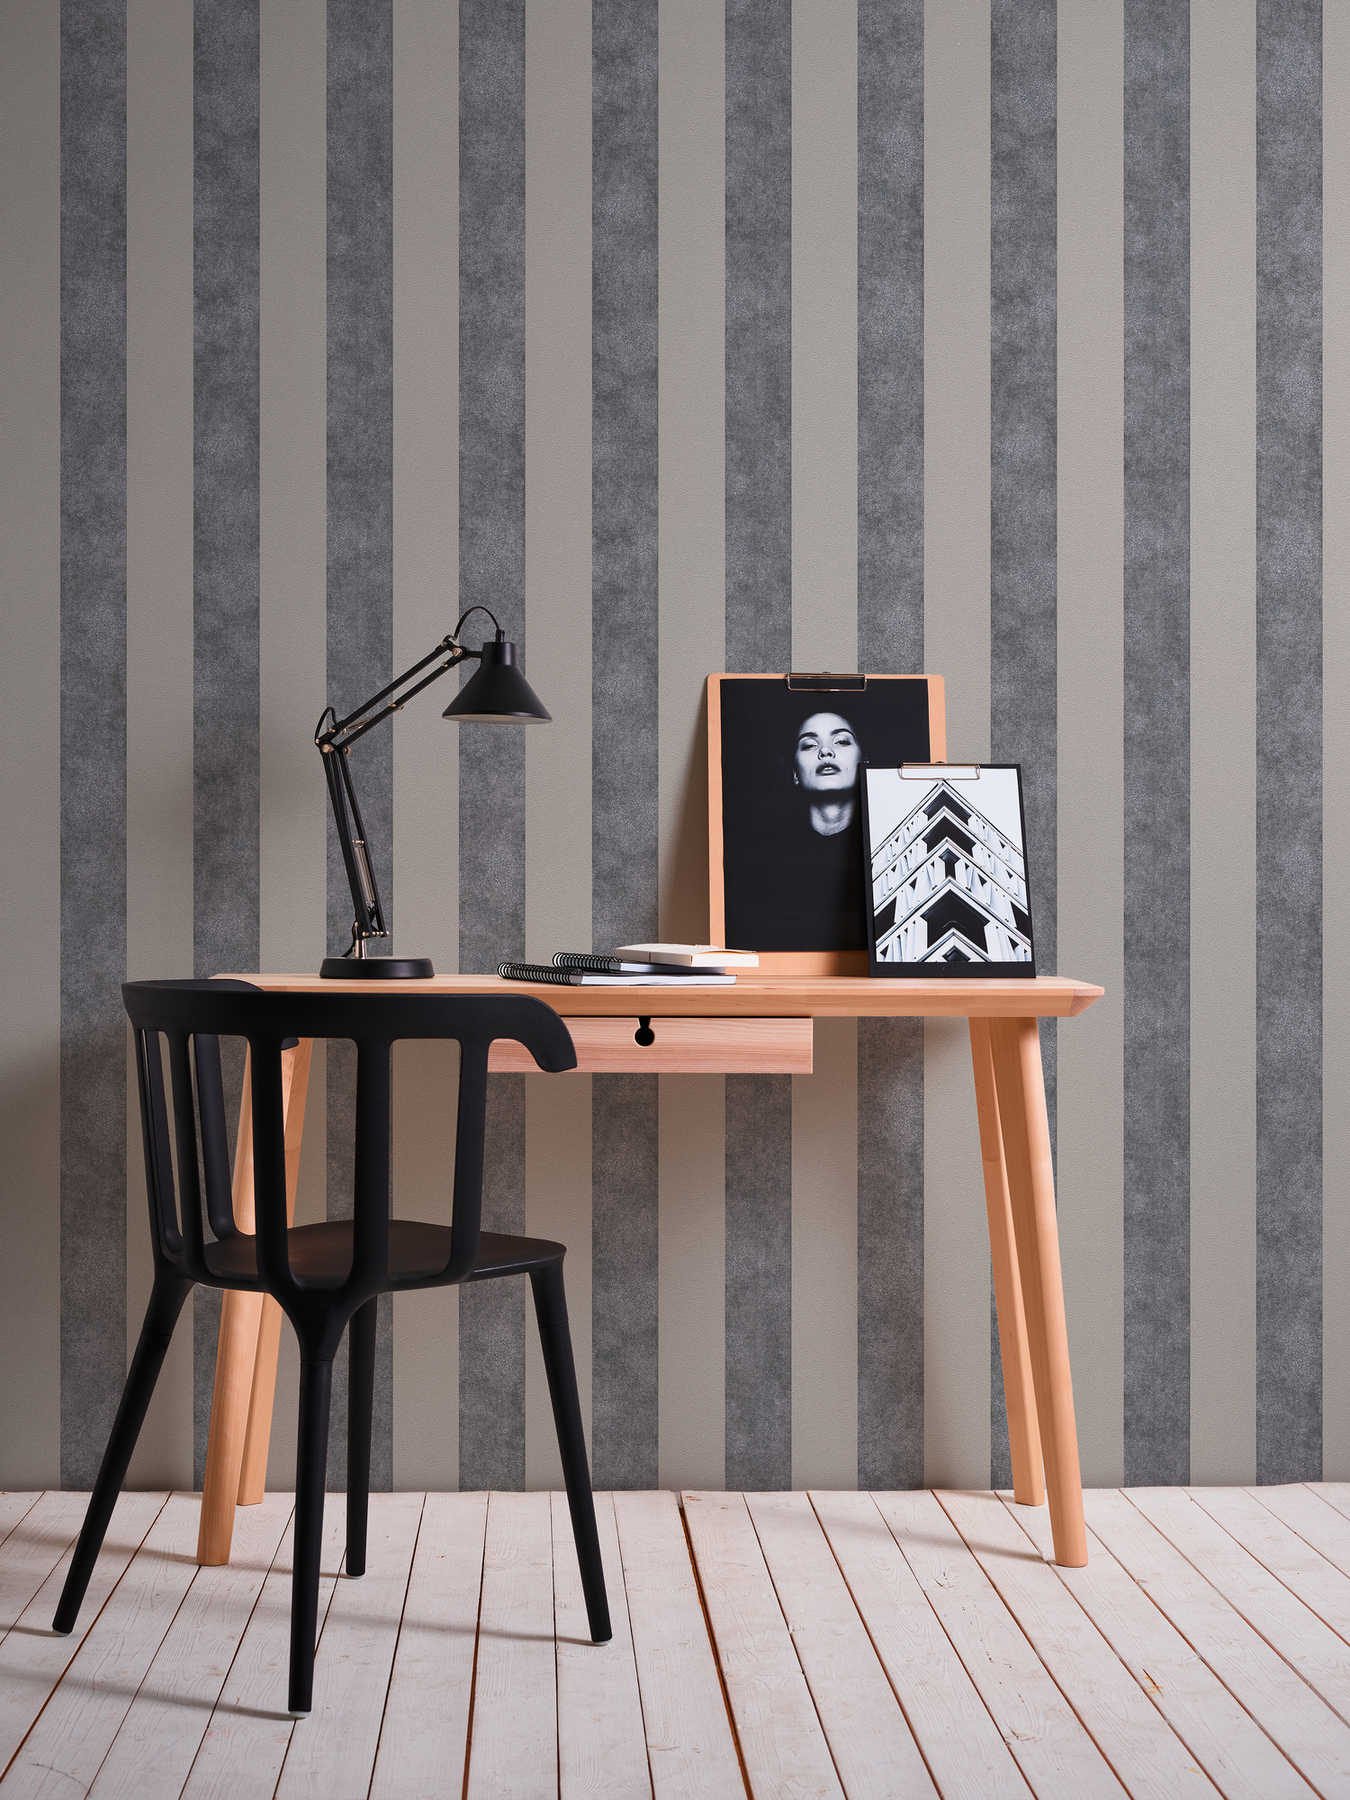             Block stripes wallpaper with colour and texture pattern - black, grey, beige
        